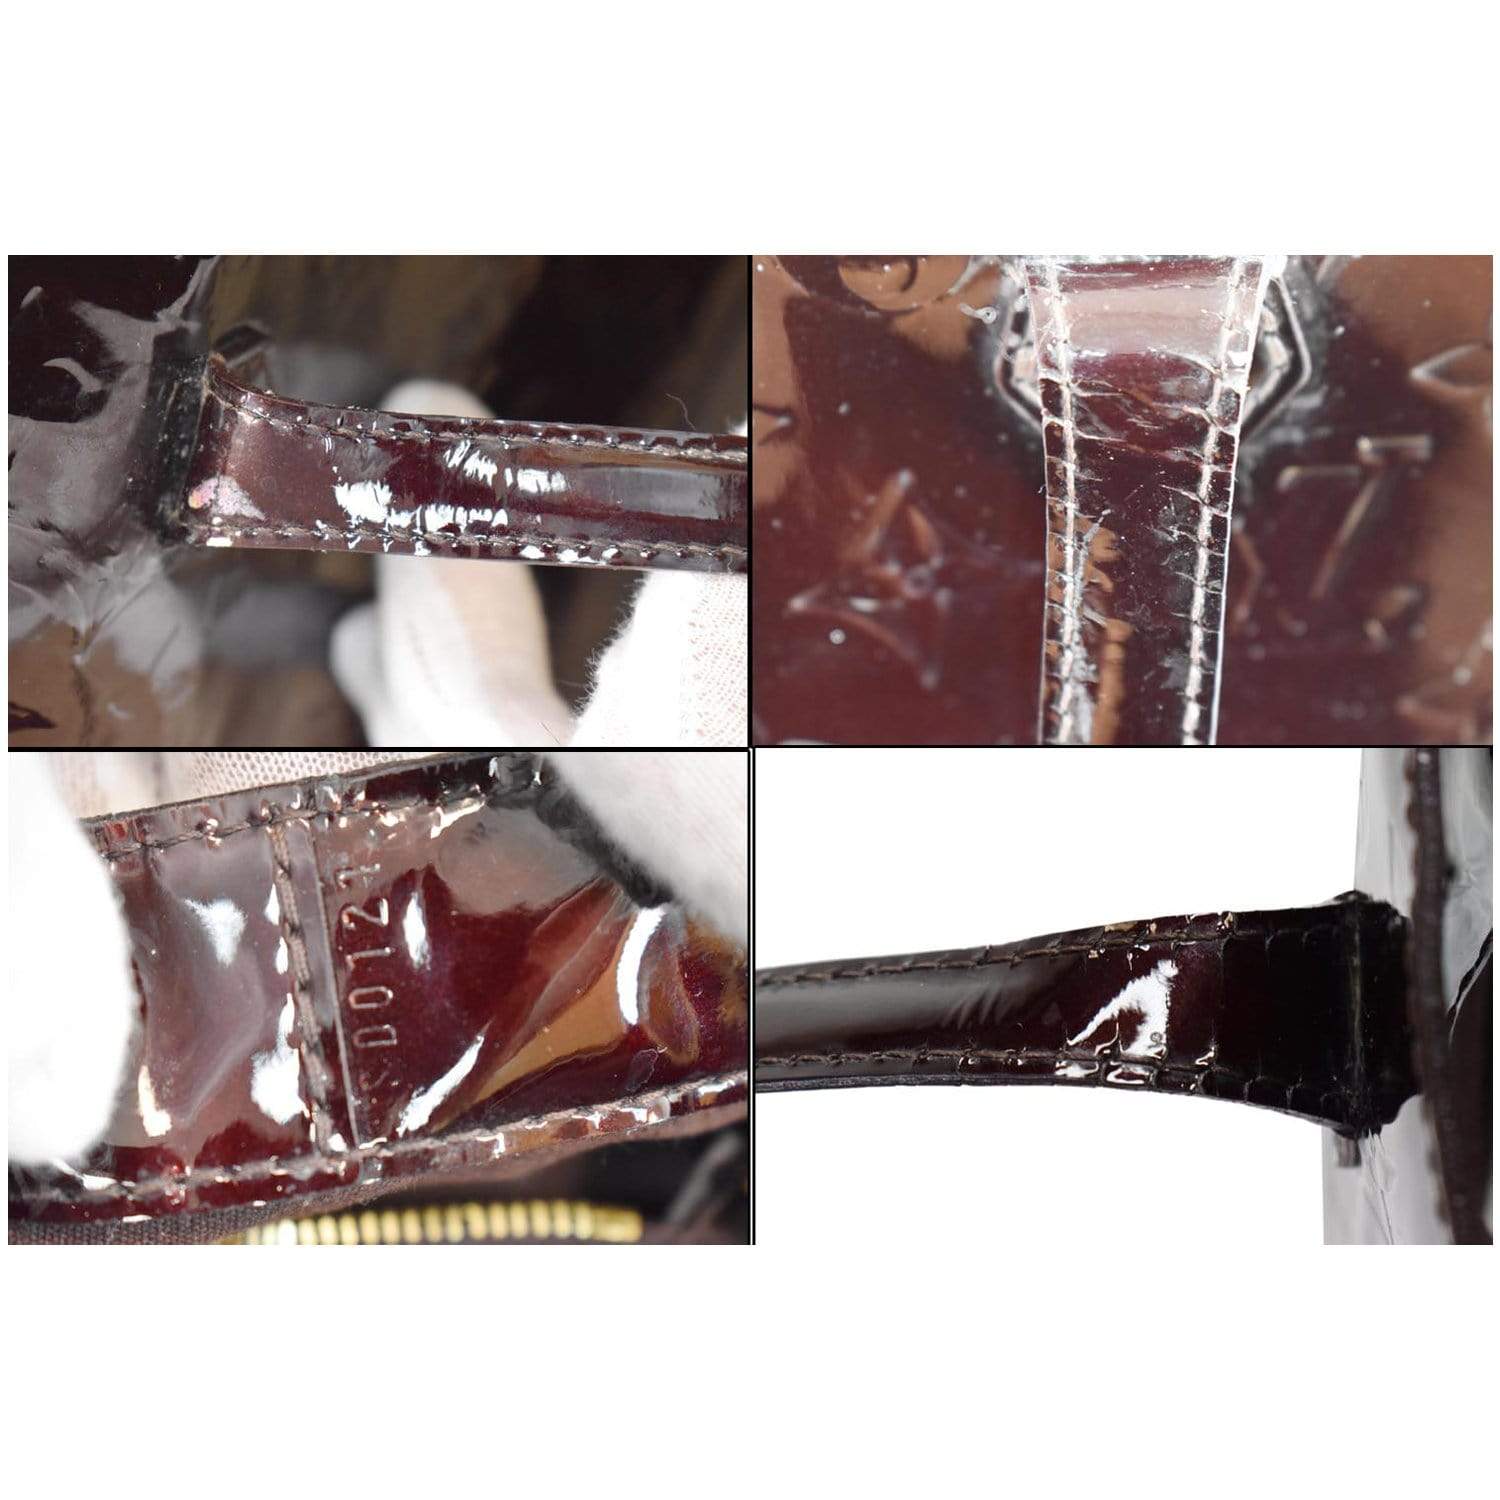 Wilshire patent leather bag Louis Vuitton Burgundy in Patent